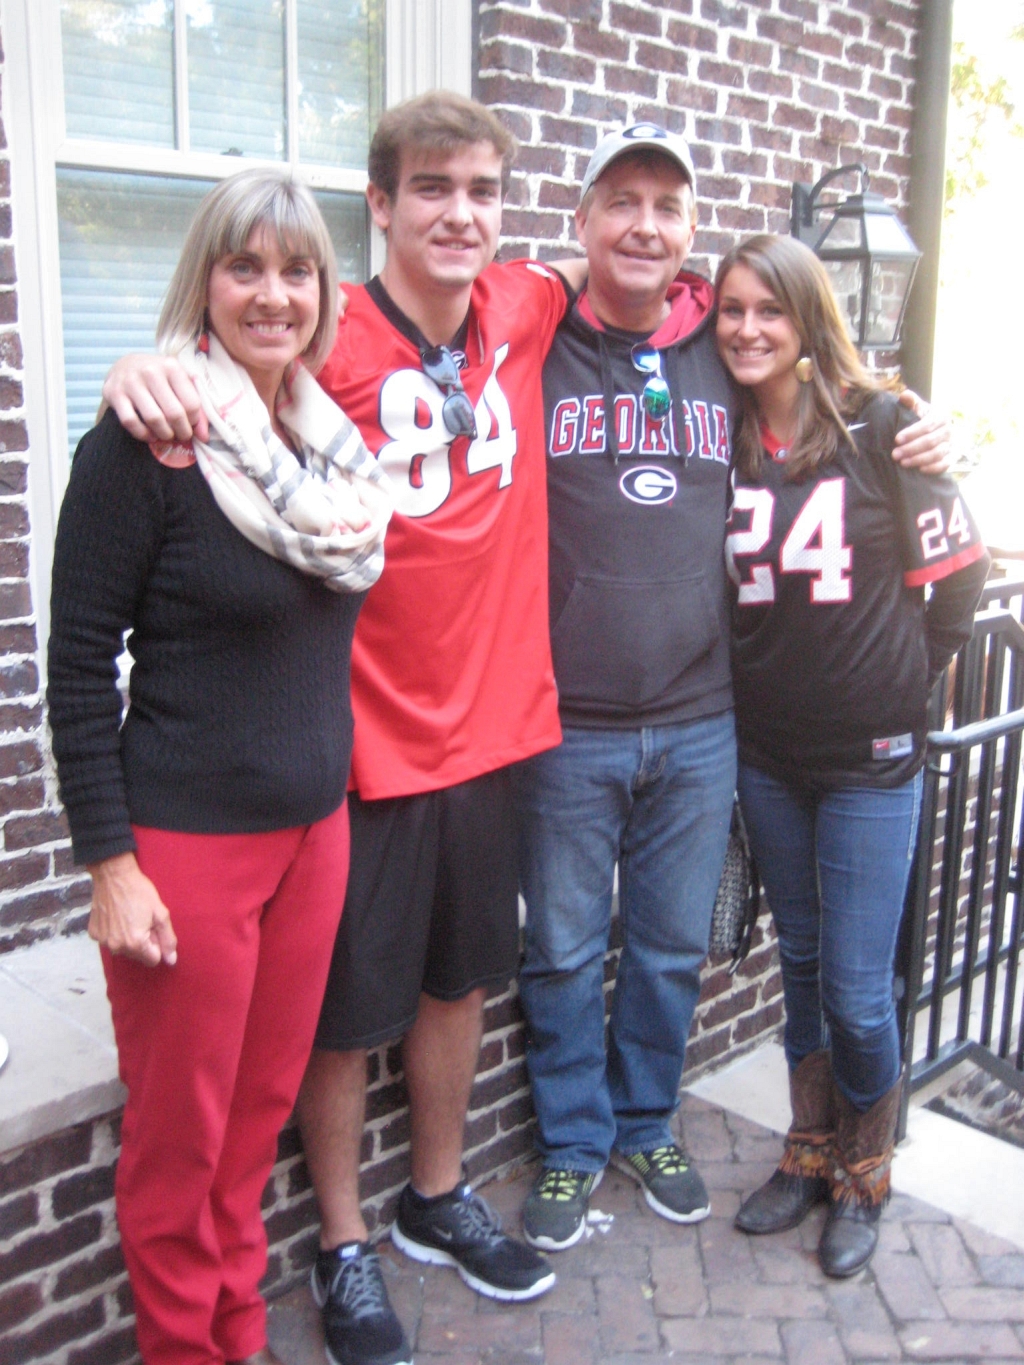 Lauriel, Jack, Arthur and Diana Marchesini - Mizzou vs. UGA - 17-Oct-2015 (Photo by Bulldawg Illustrated's Cheri and Vance Leavy)